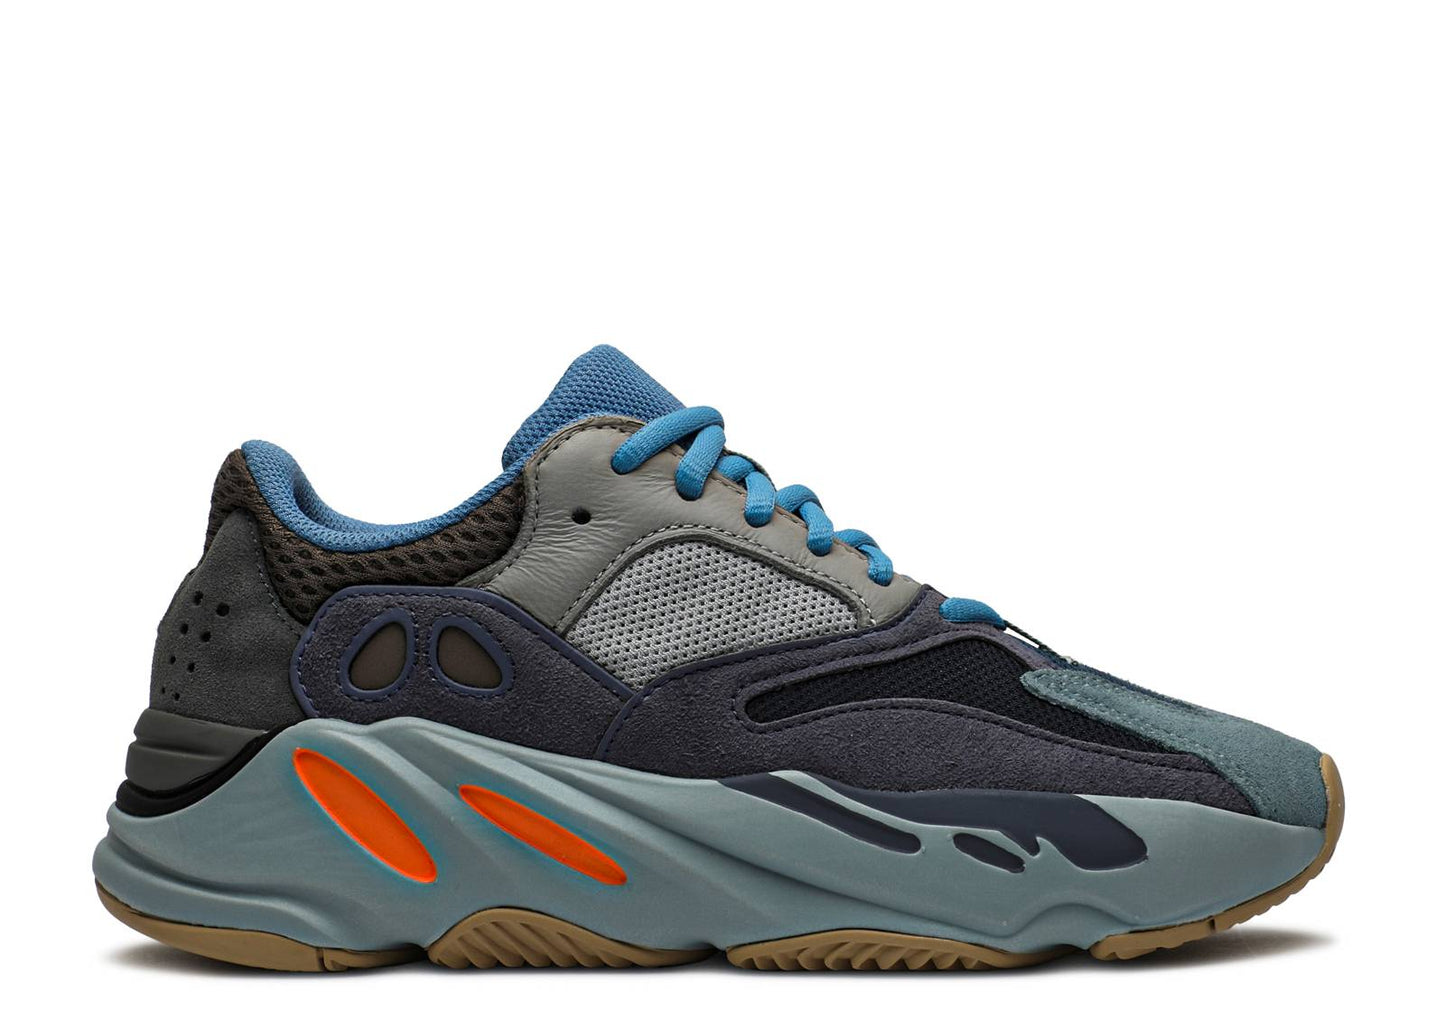 YEEZY BOOST 700 "CARBON BLUE"